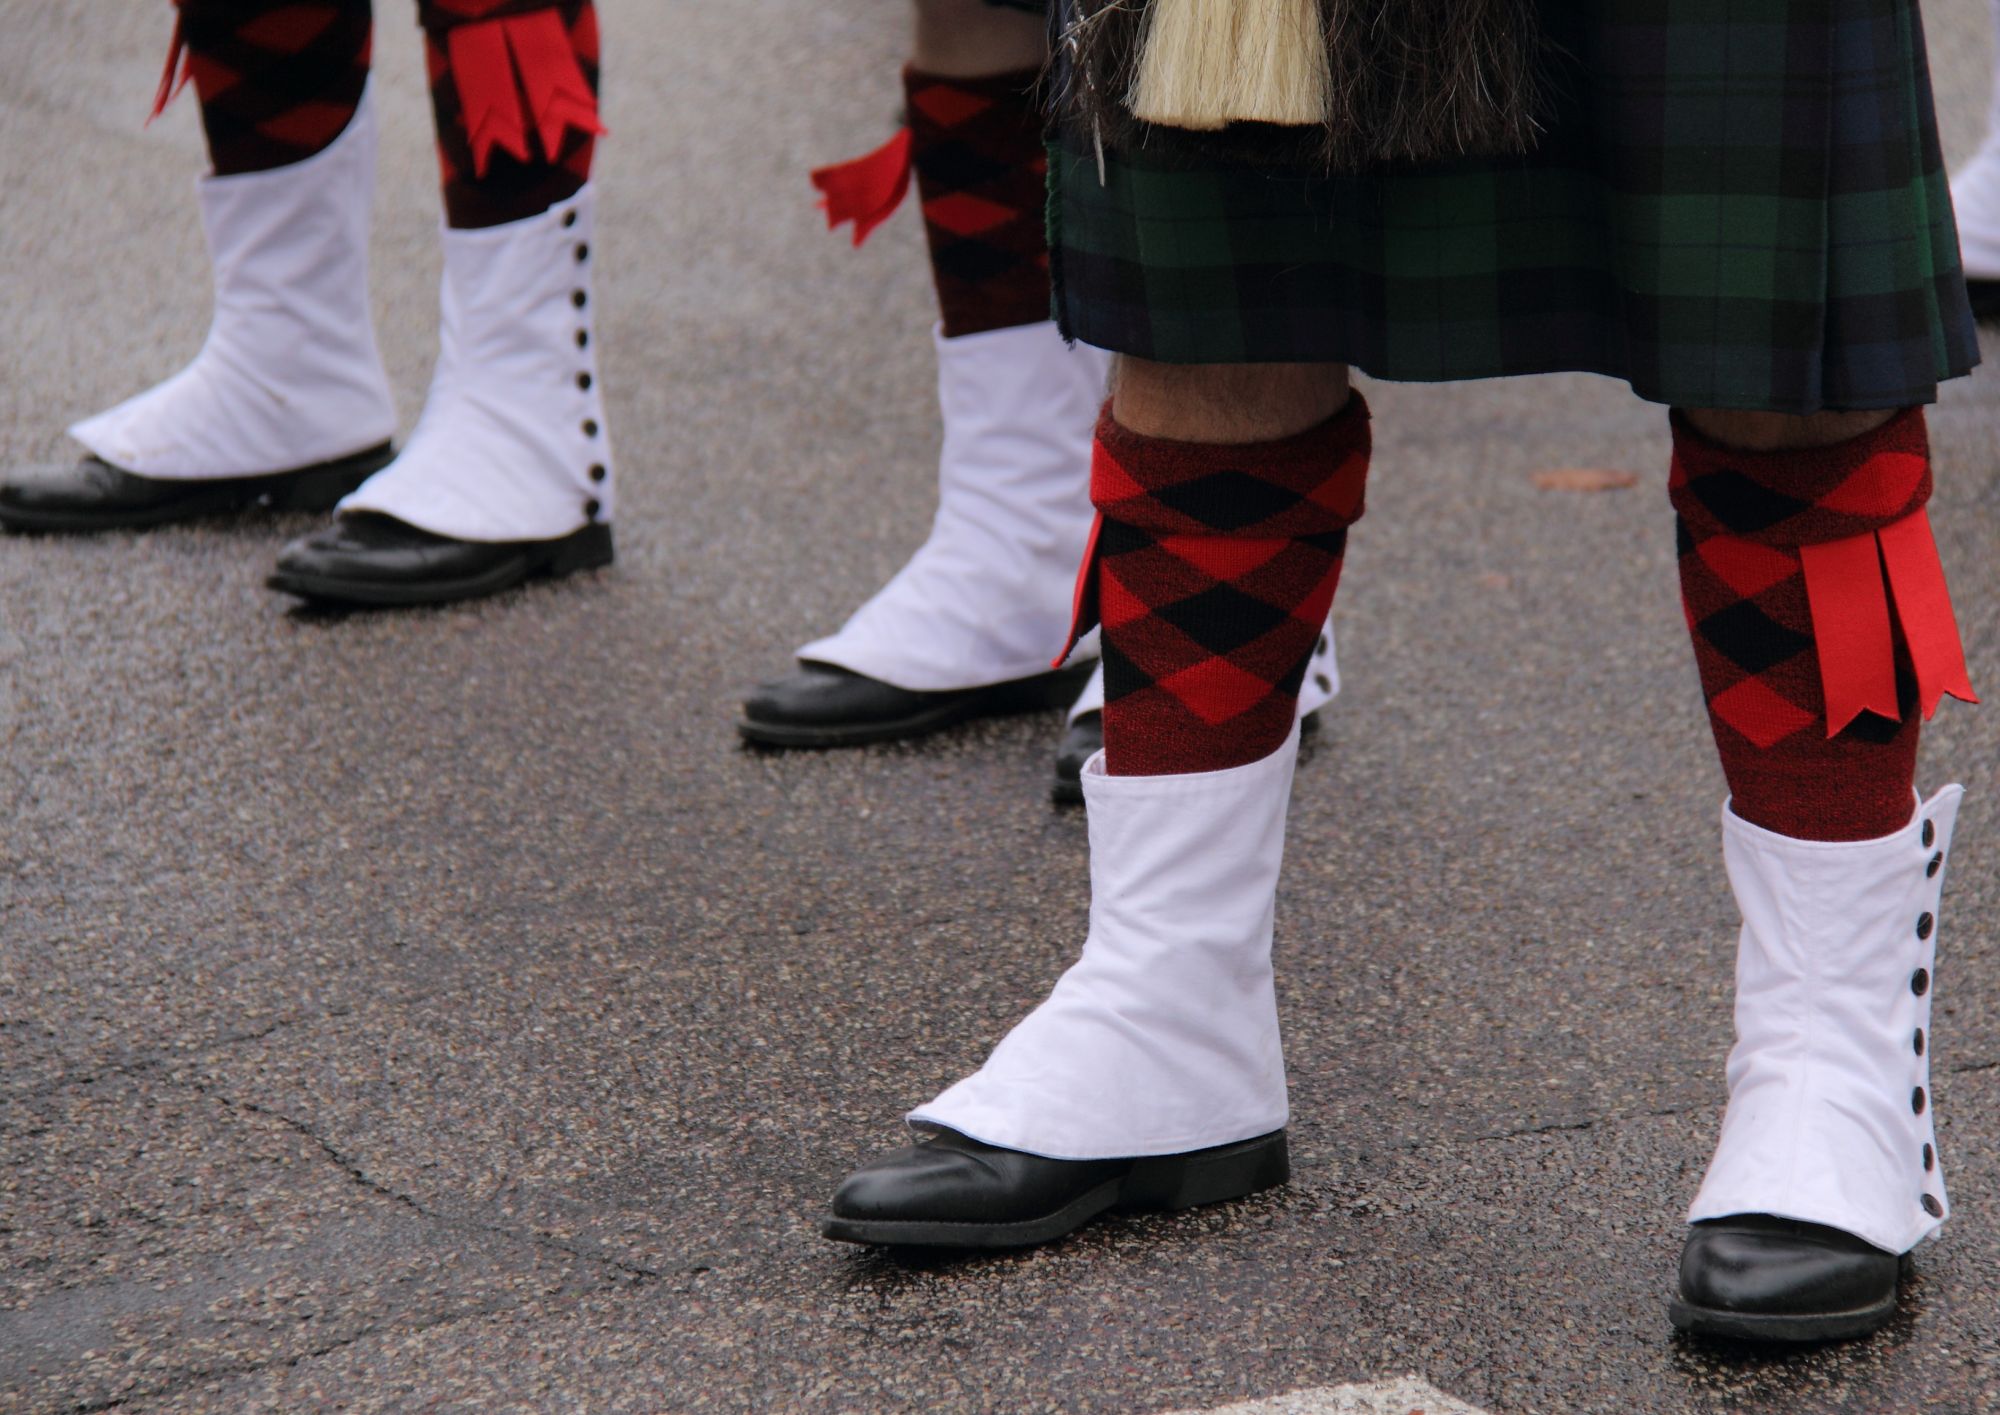 Pieds pipers